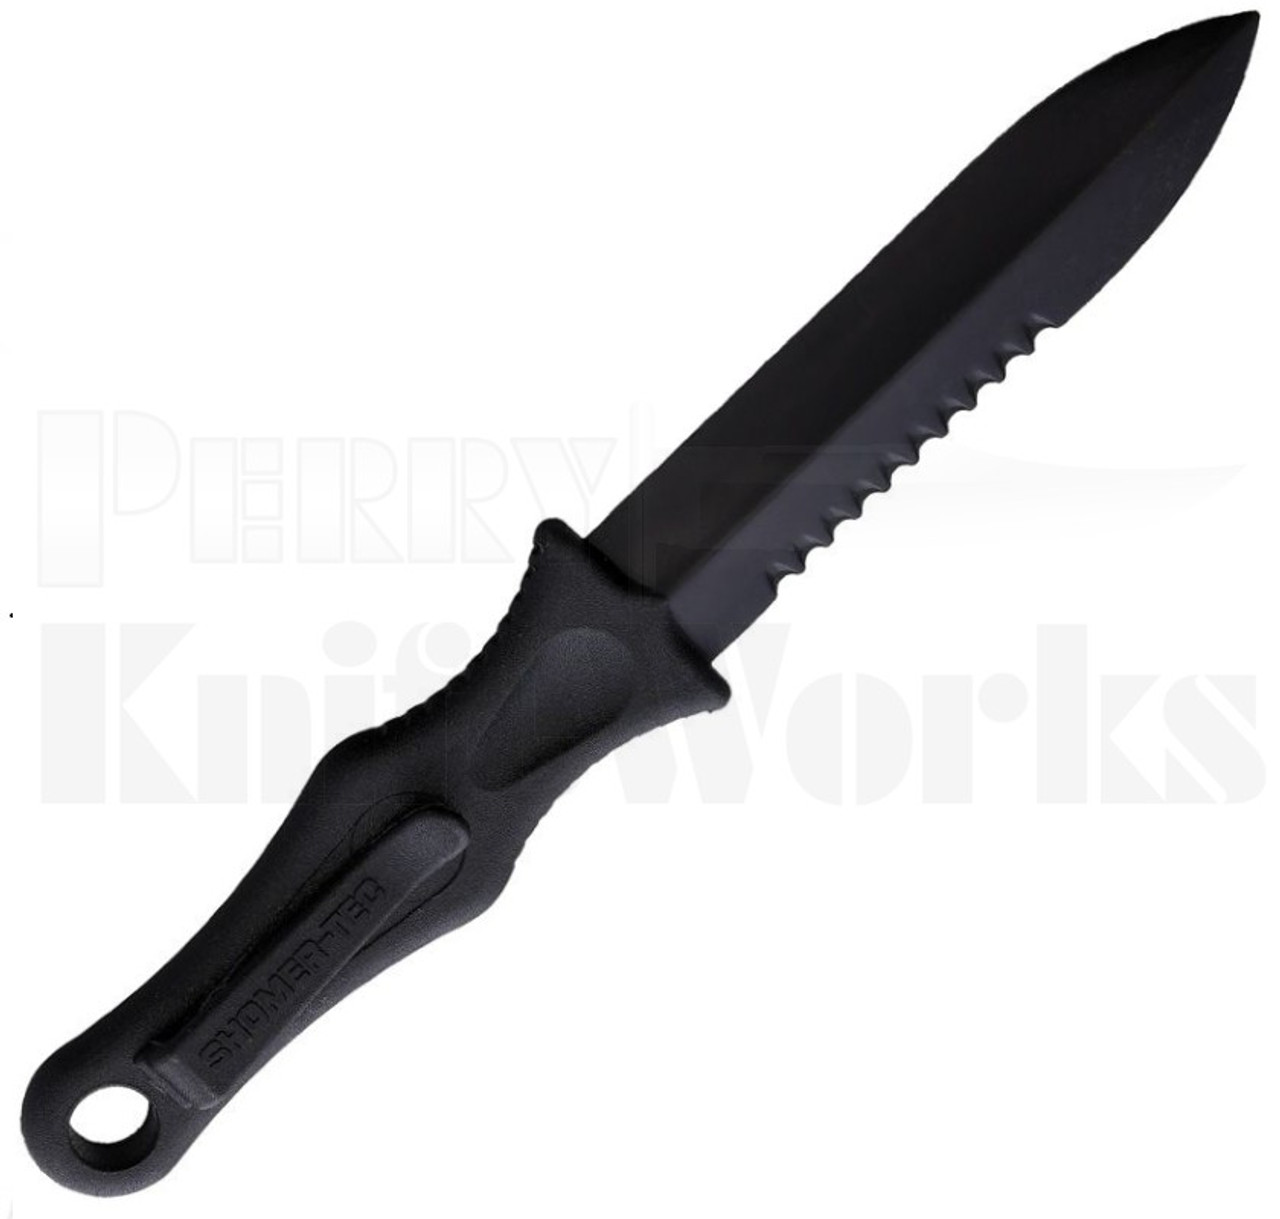 Shomer-Tec CIA Covert Cutter Fixed Blade Knife l For Sale